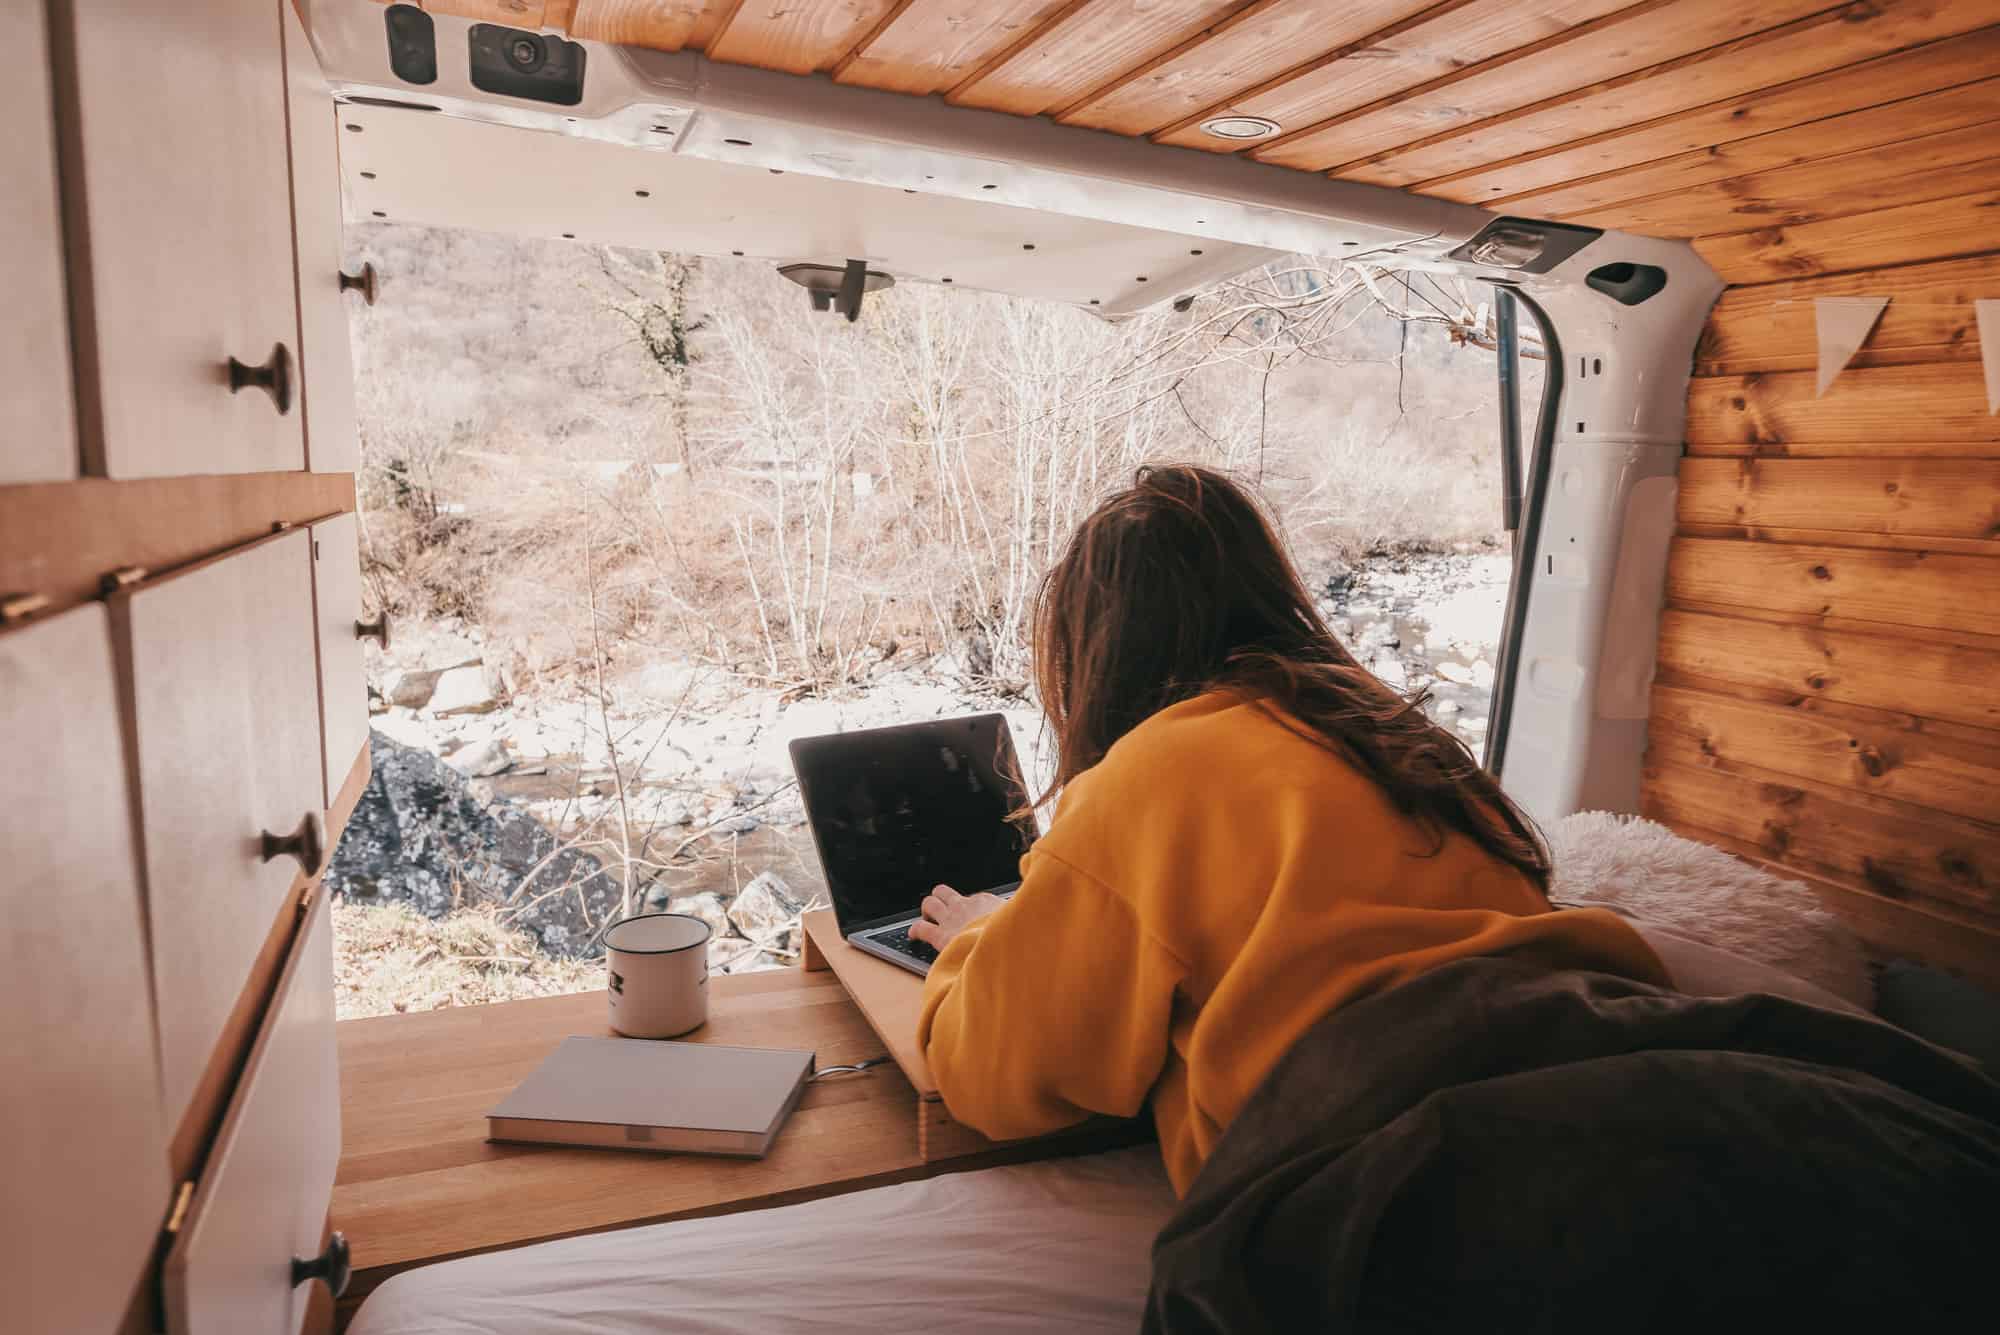 Working on the road: essential tips and tricks for digital nomads and van life remote workers